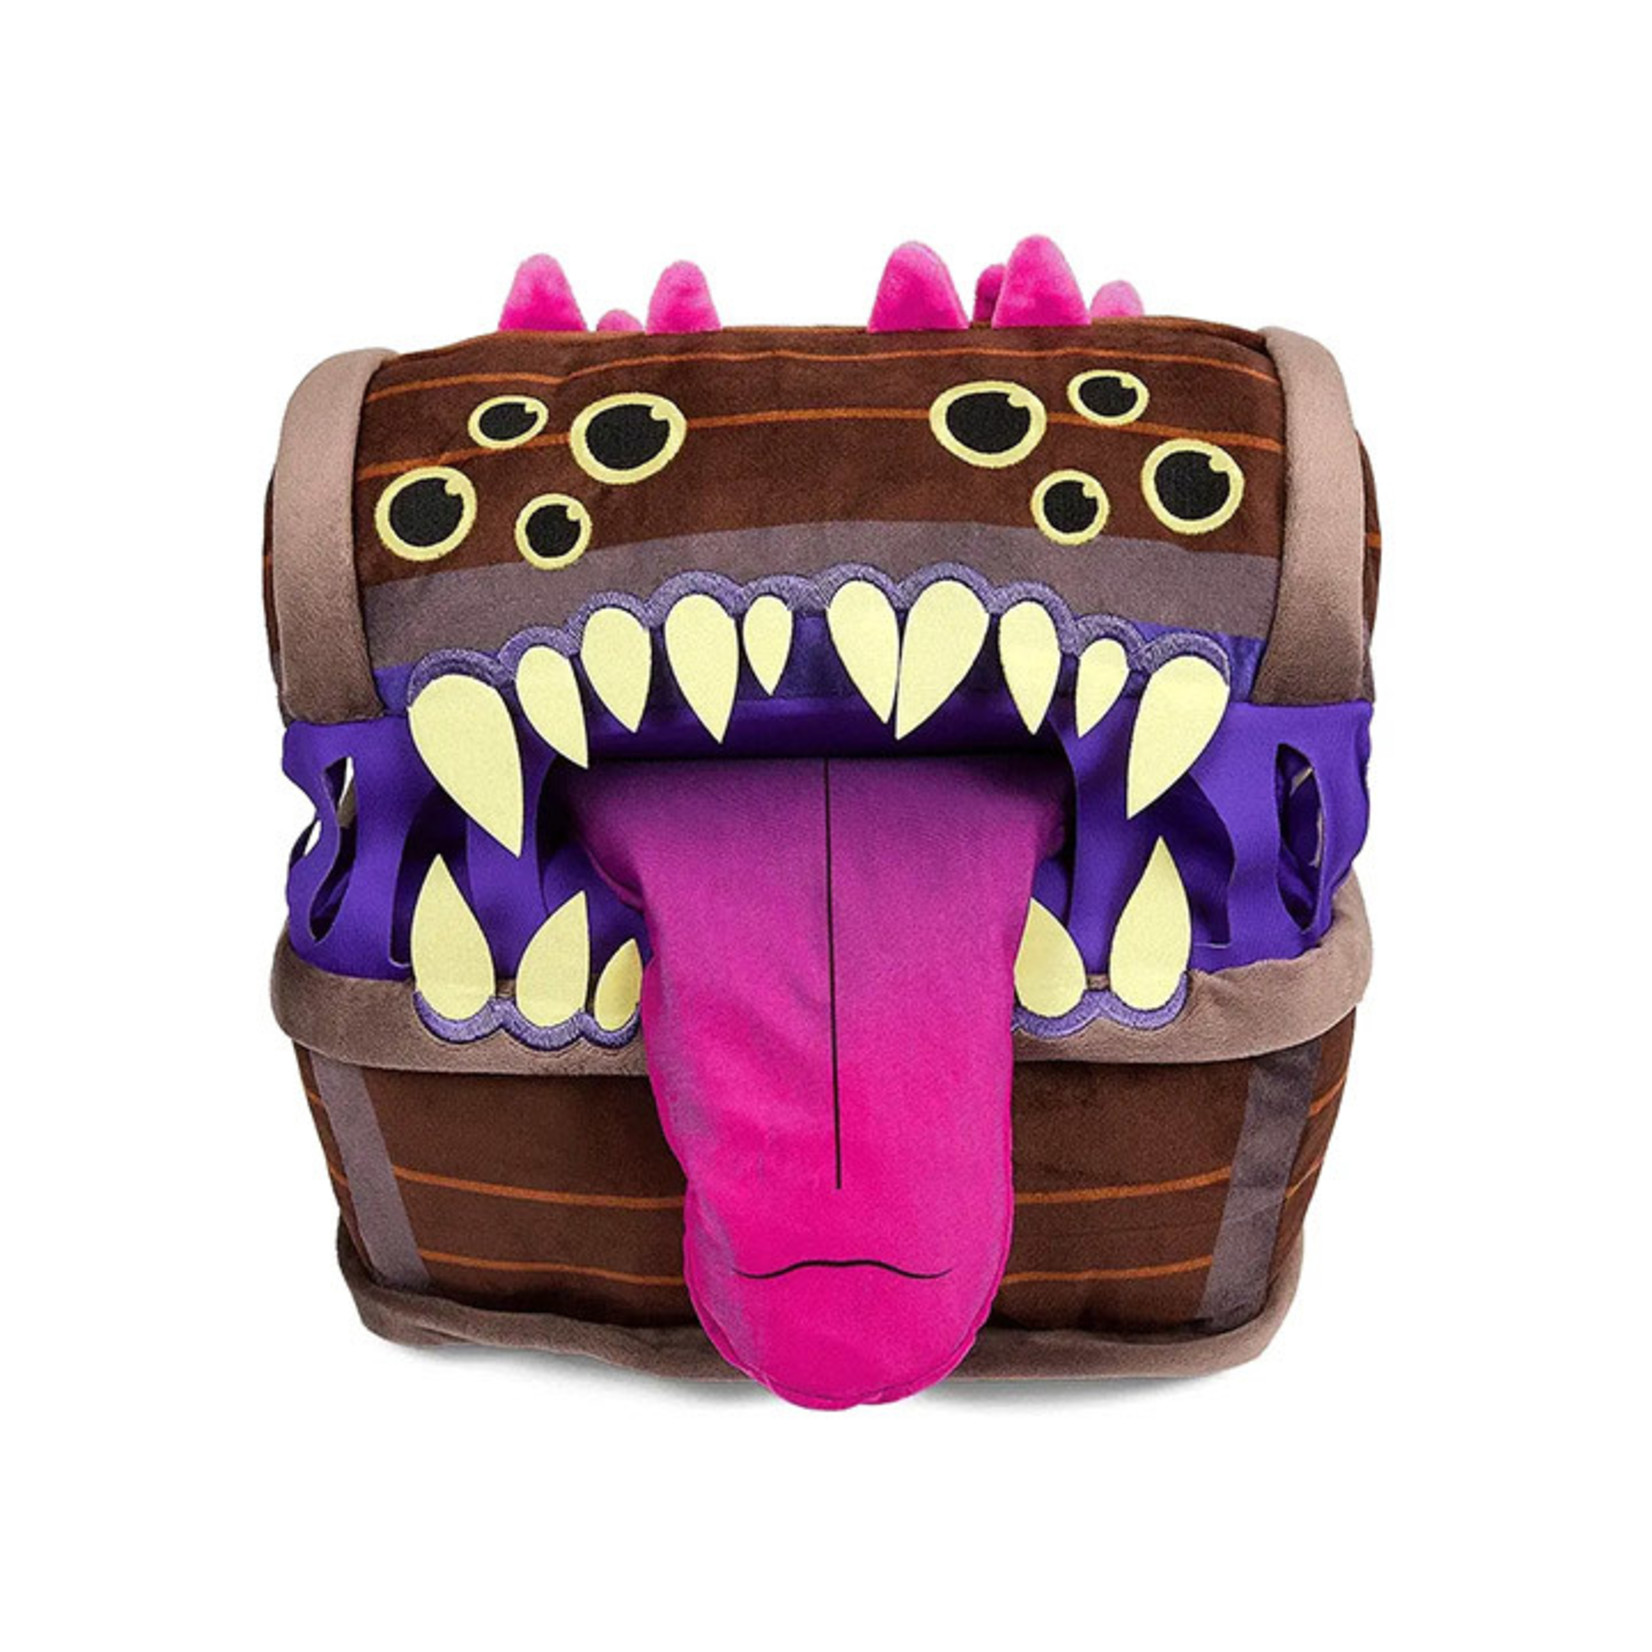 D&D: Honor Among Thieves Mimic 11" Glow in the Dark Plush